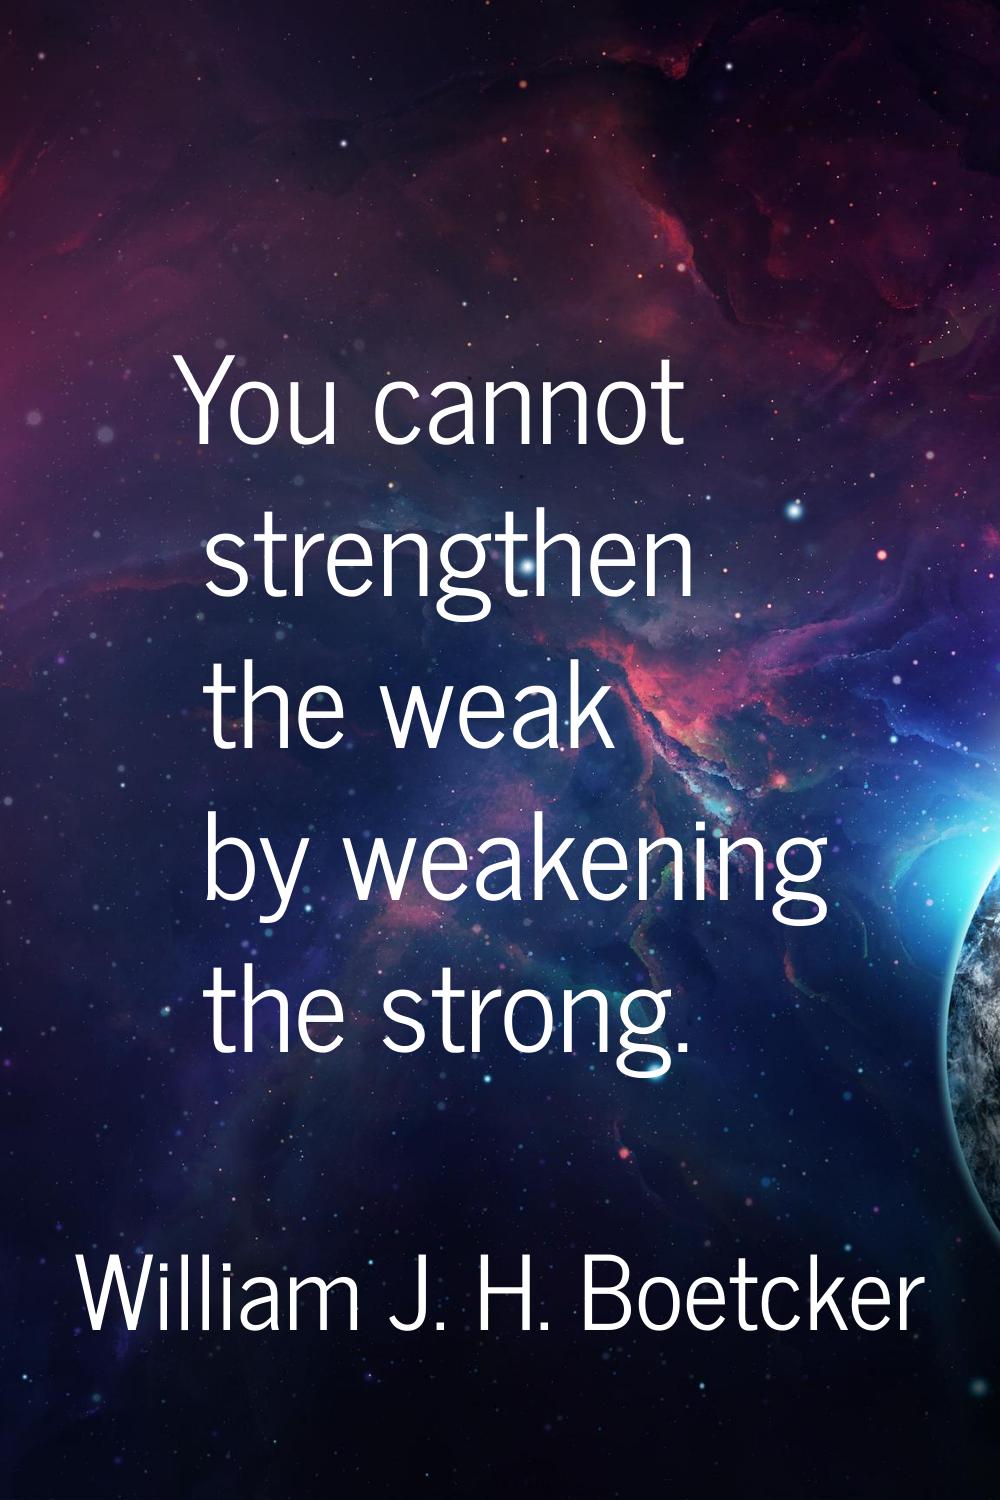 You cannot strengthen the weak by weakening the strong.